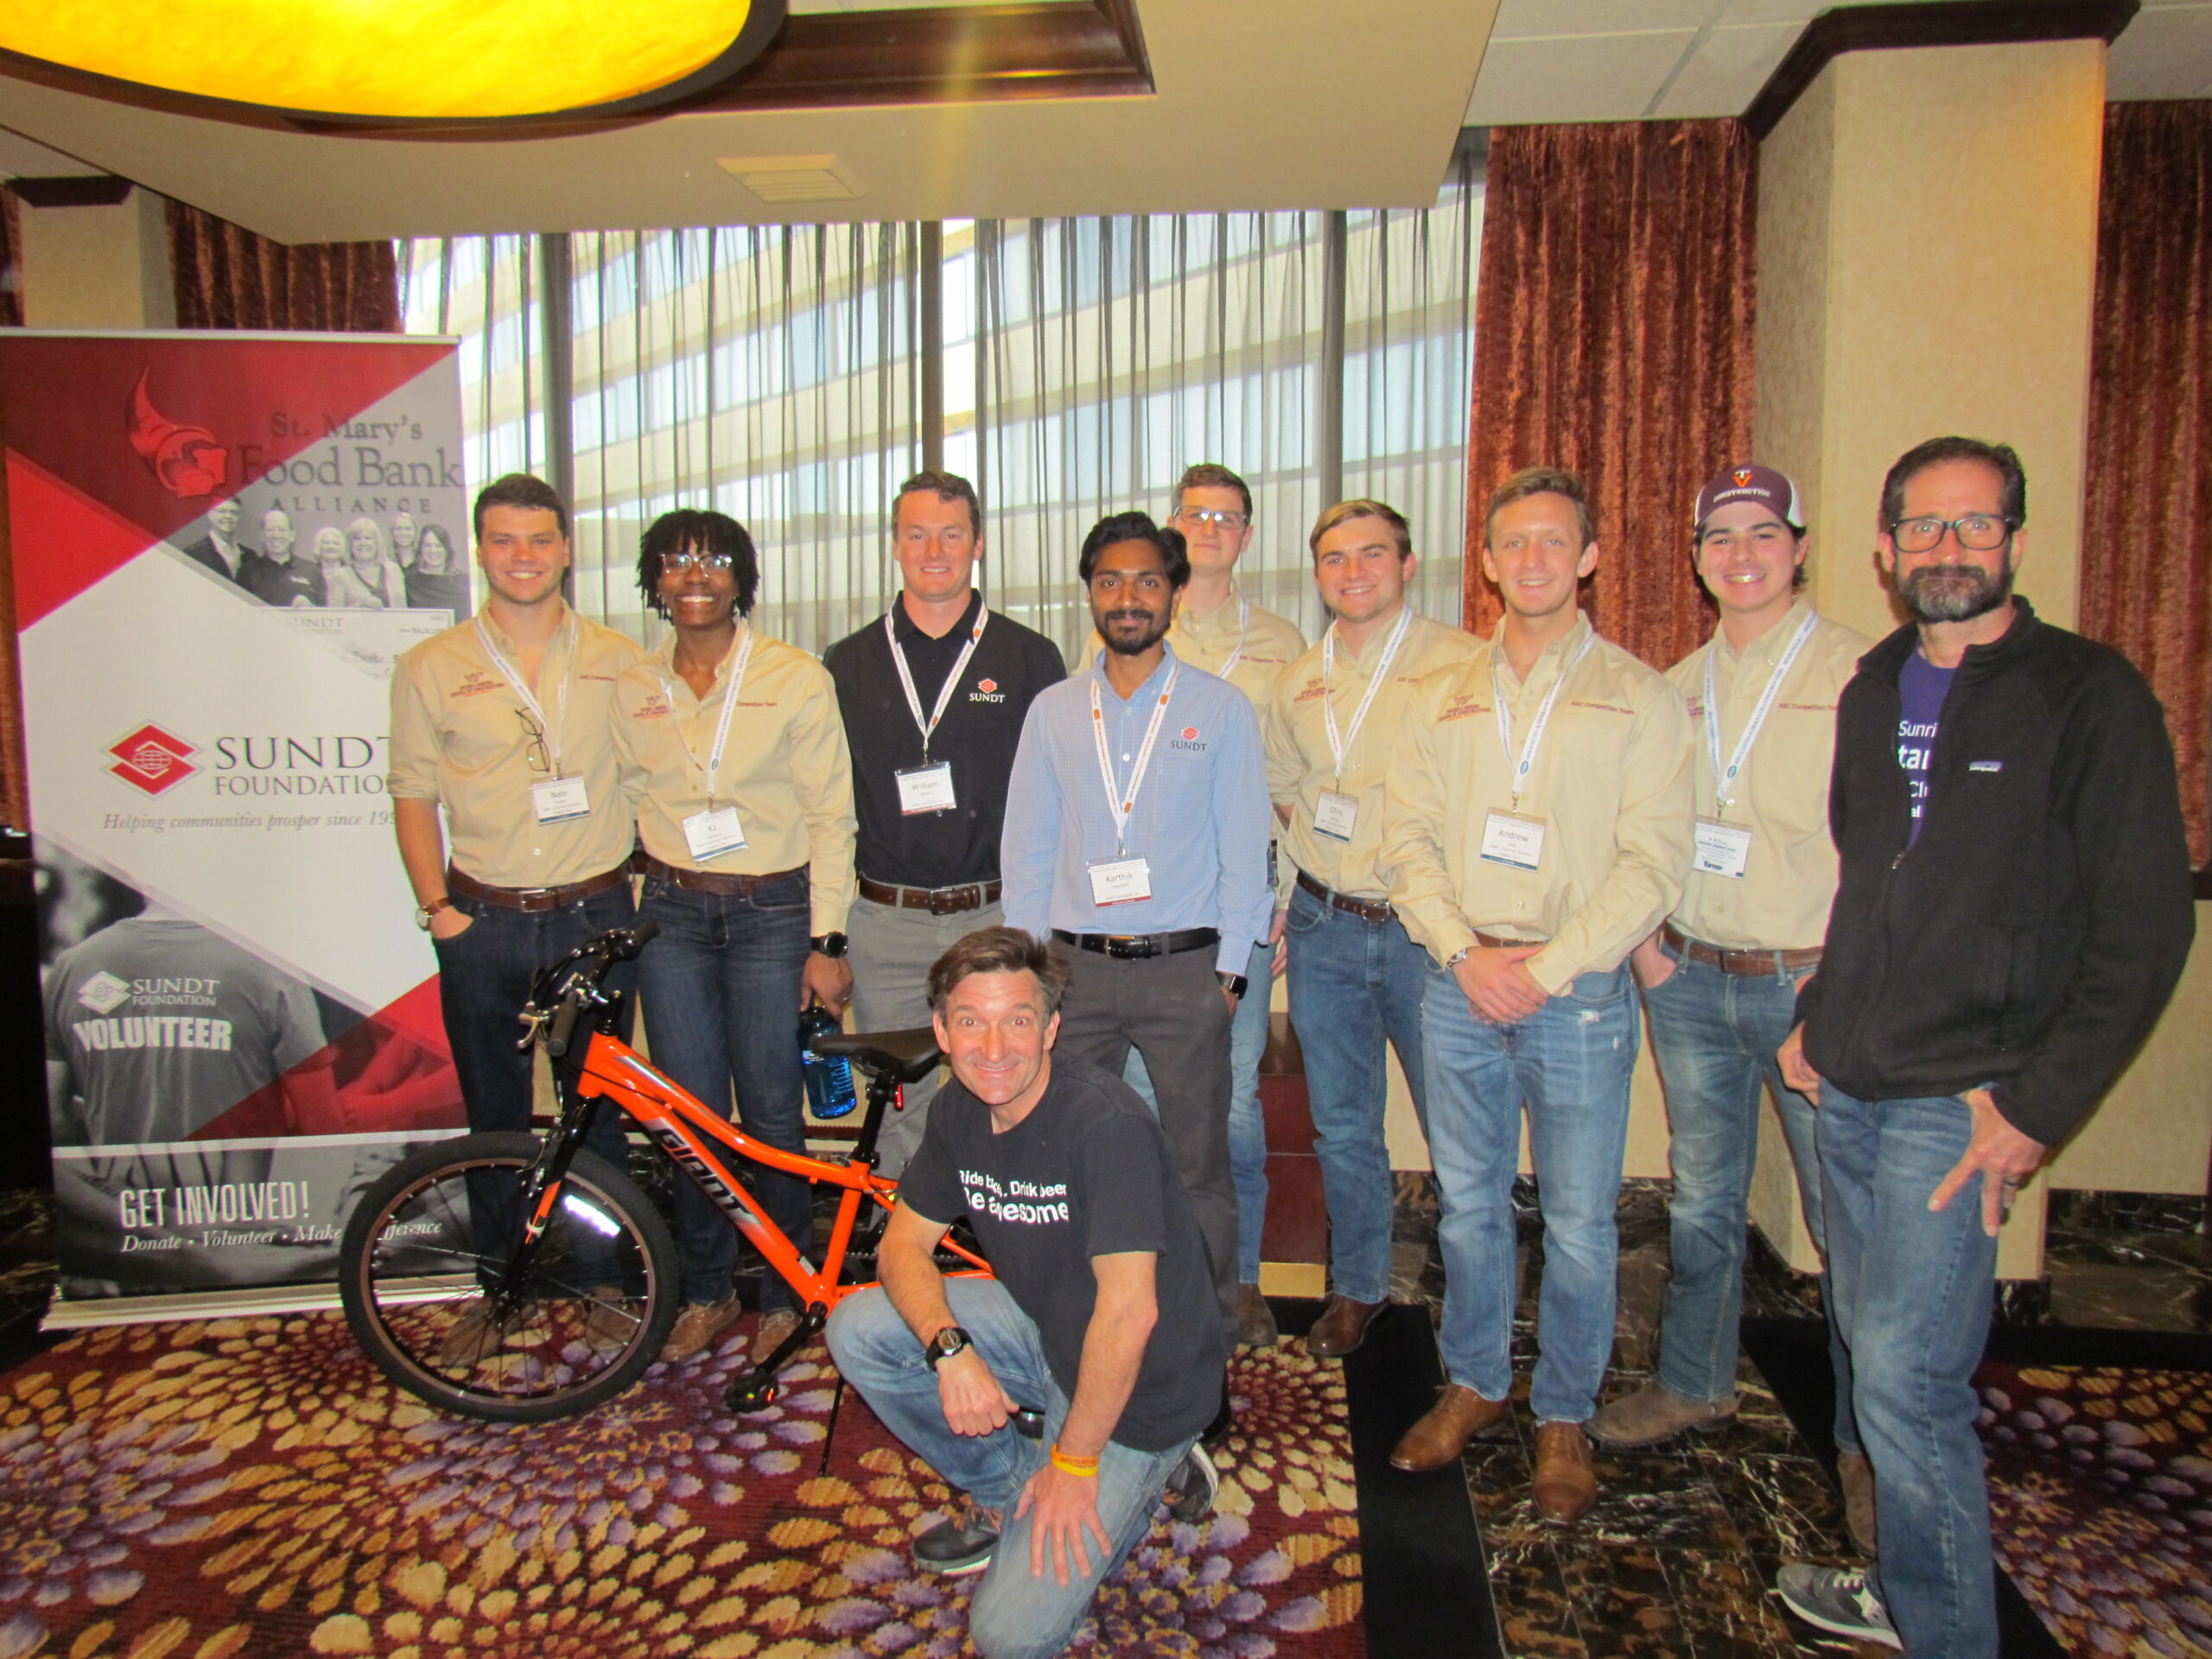 virginia tech students pose with the bike they assembled